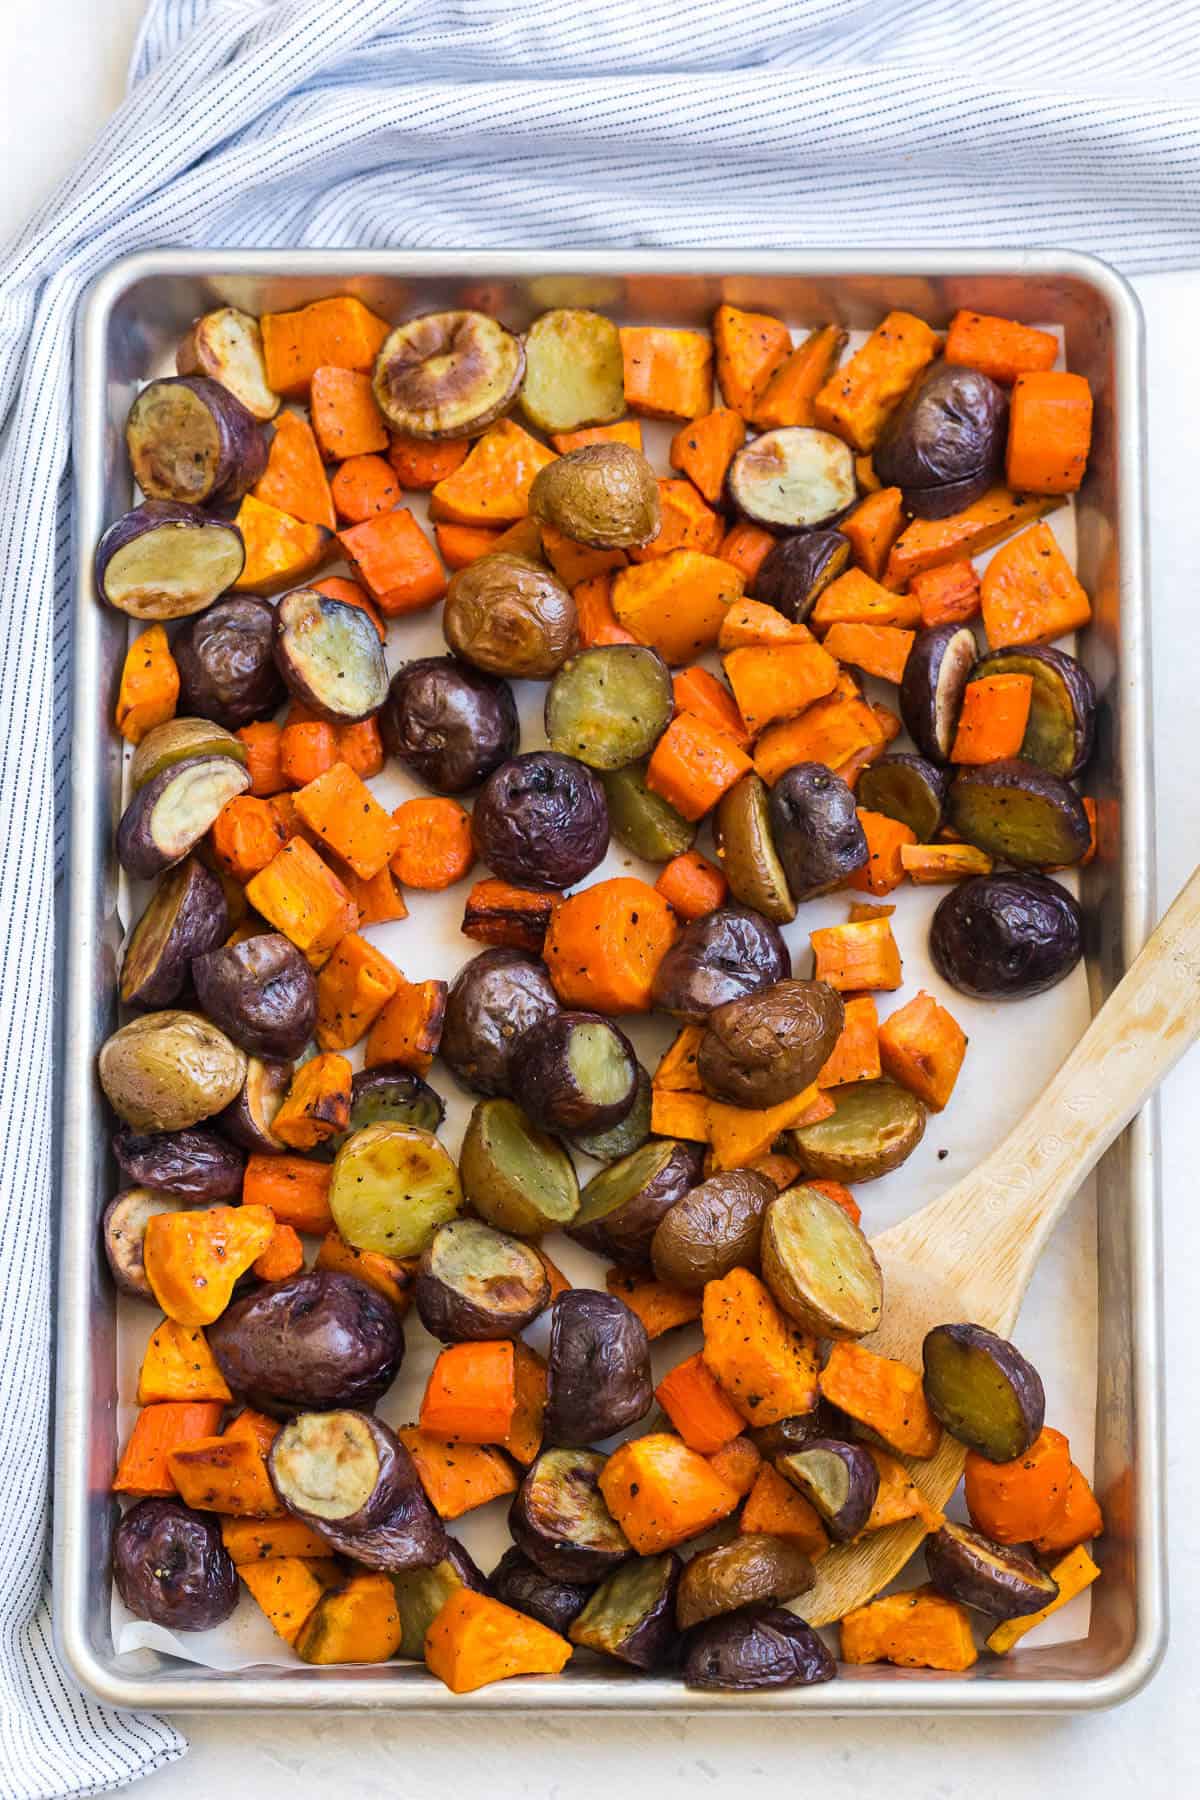 Roasted root vegetables on a sheet pan with a wooden spoon.